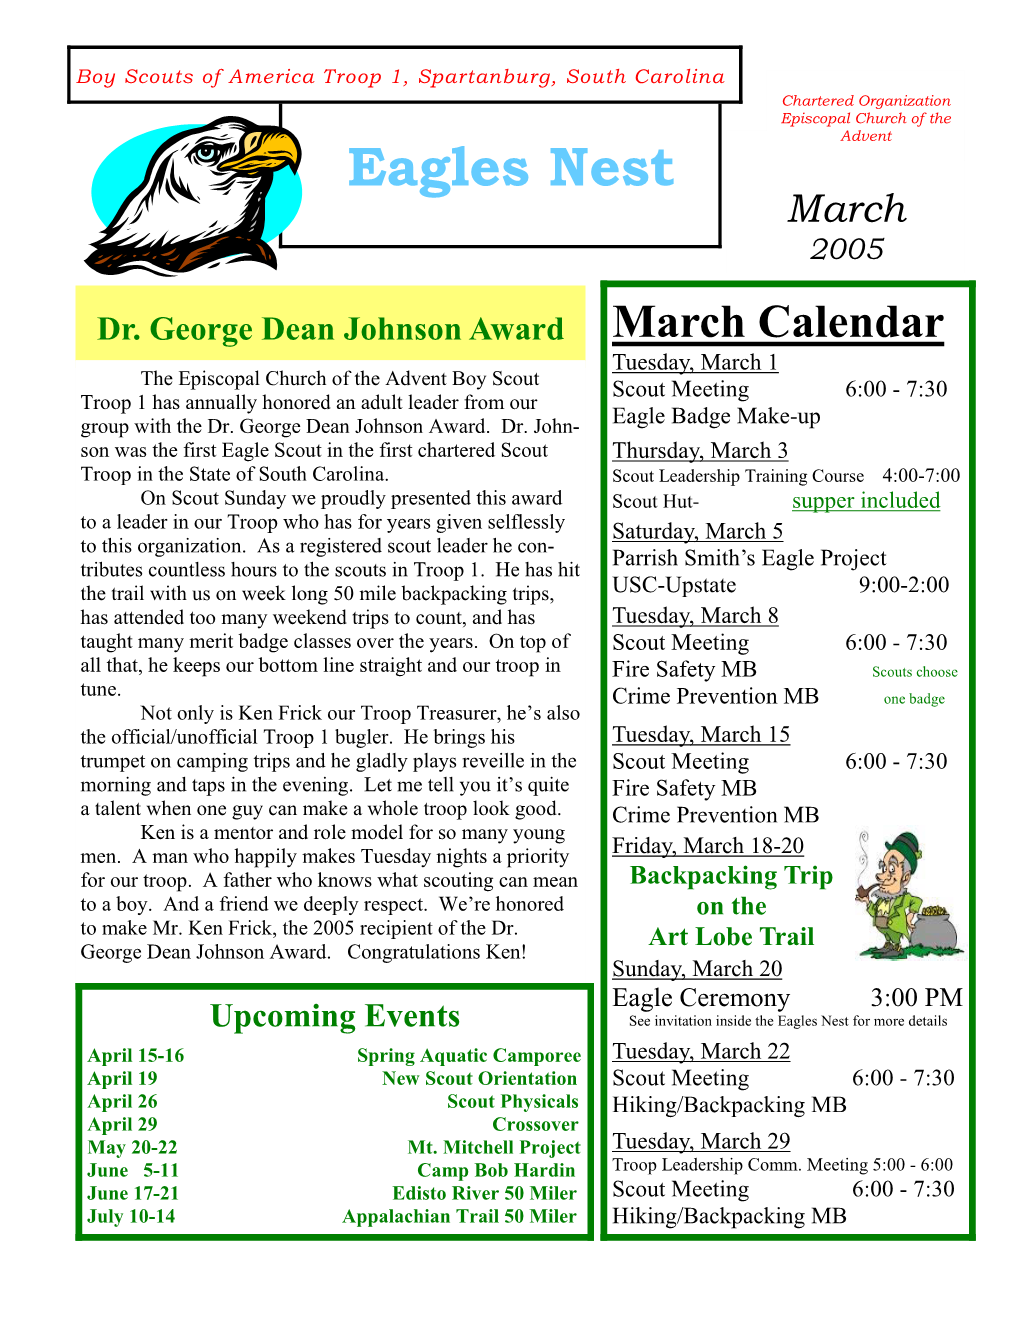 March 2005 Eagles Nest